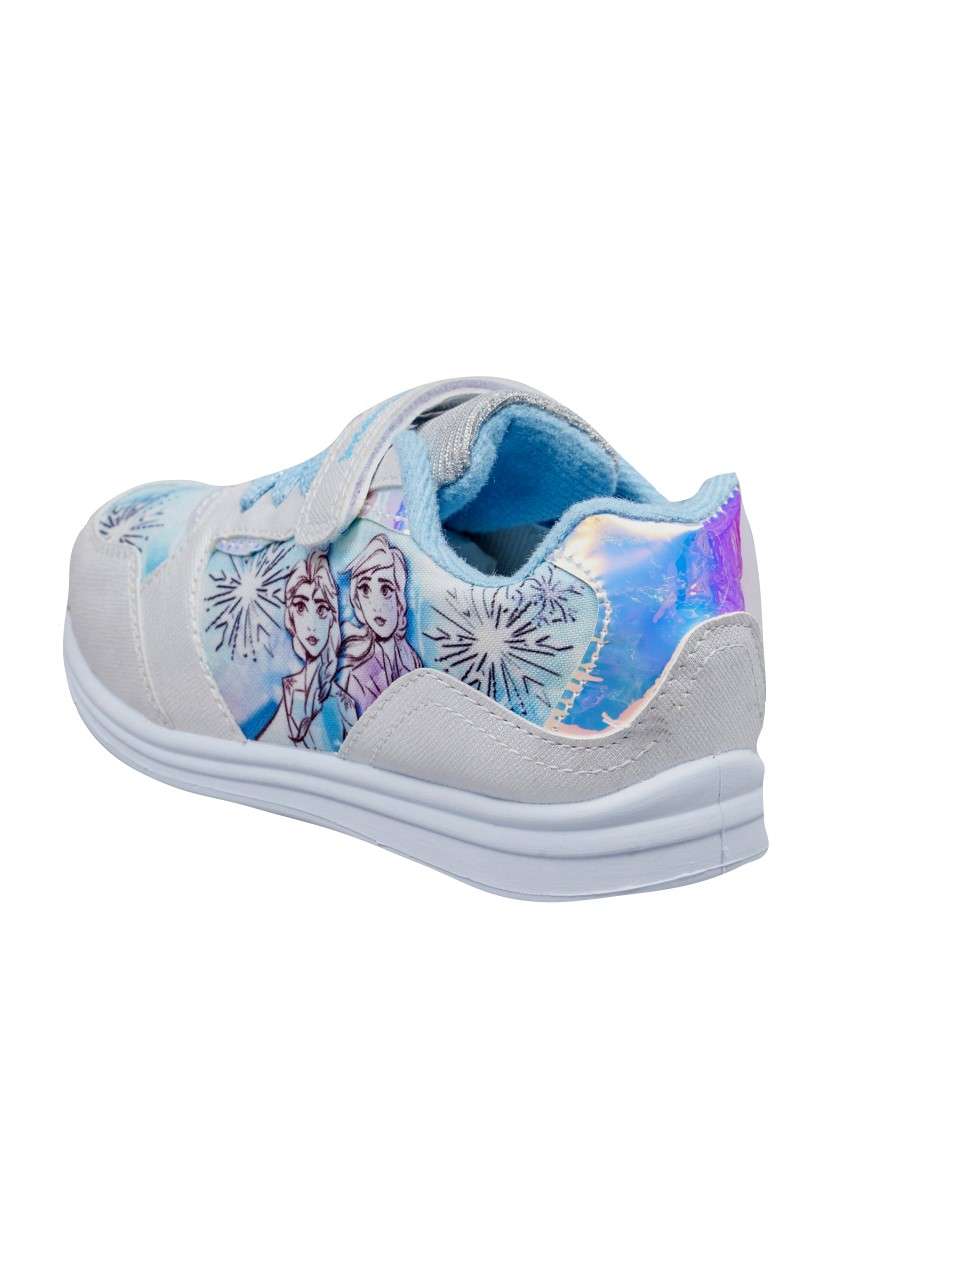 Disney Frozen Girls Silver and Blue Low Top Trainers